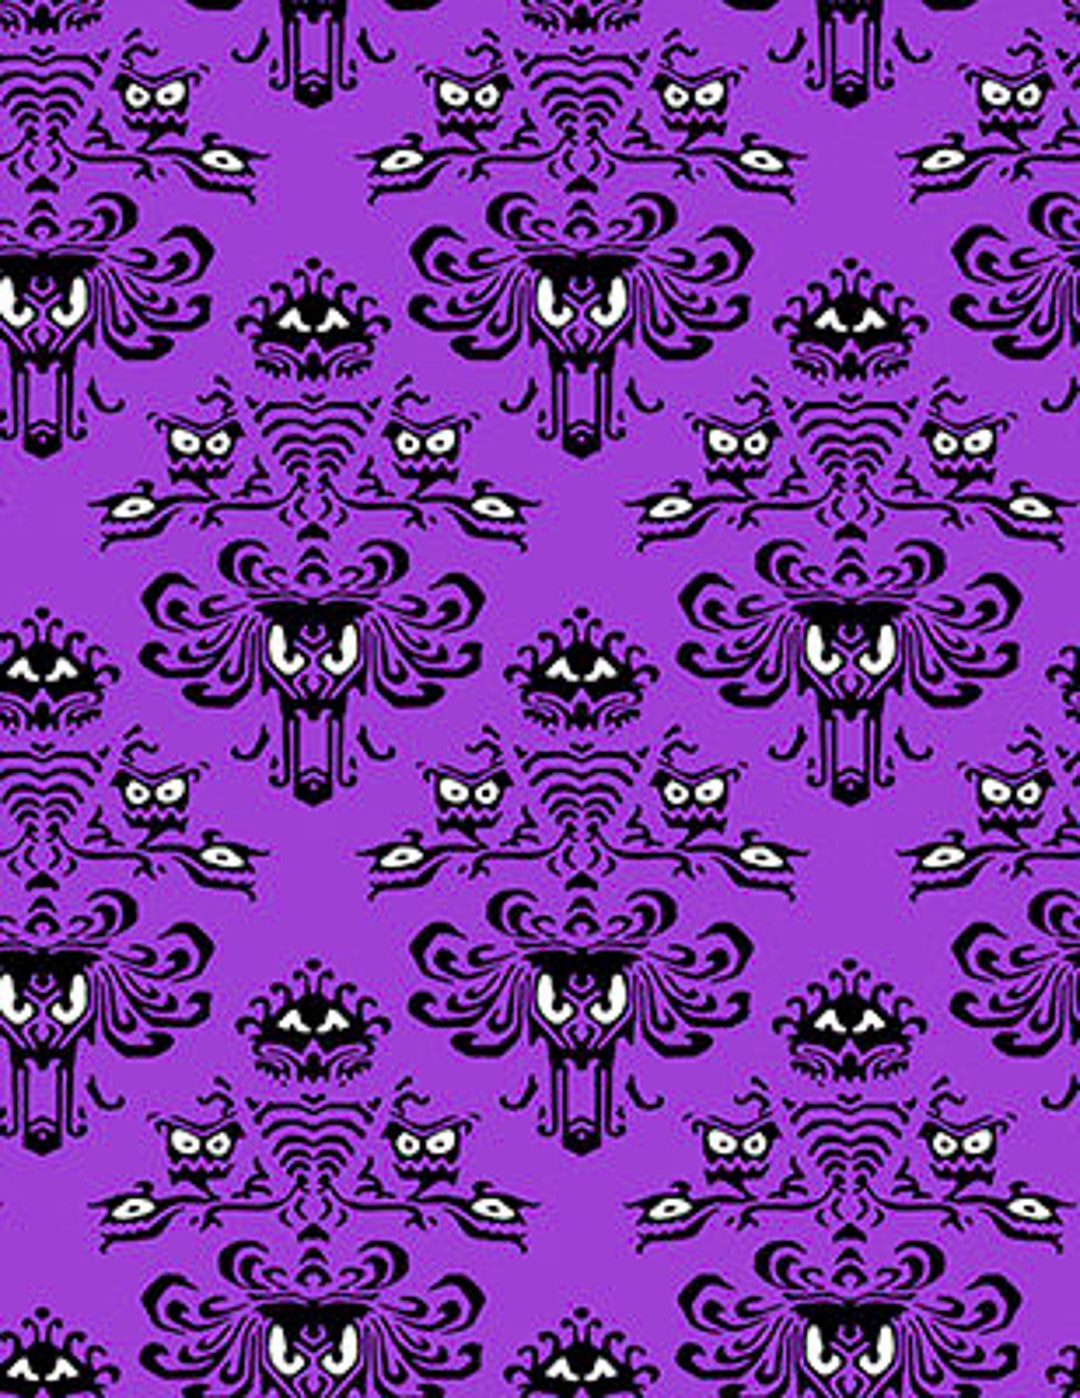 The Haunted Mansion Wallpaper Repeating Pattern, Digital File, for ...